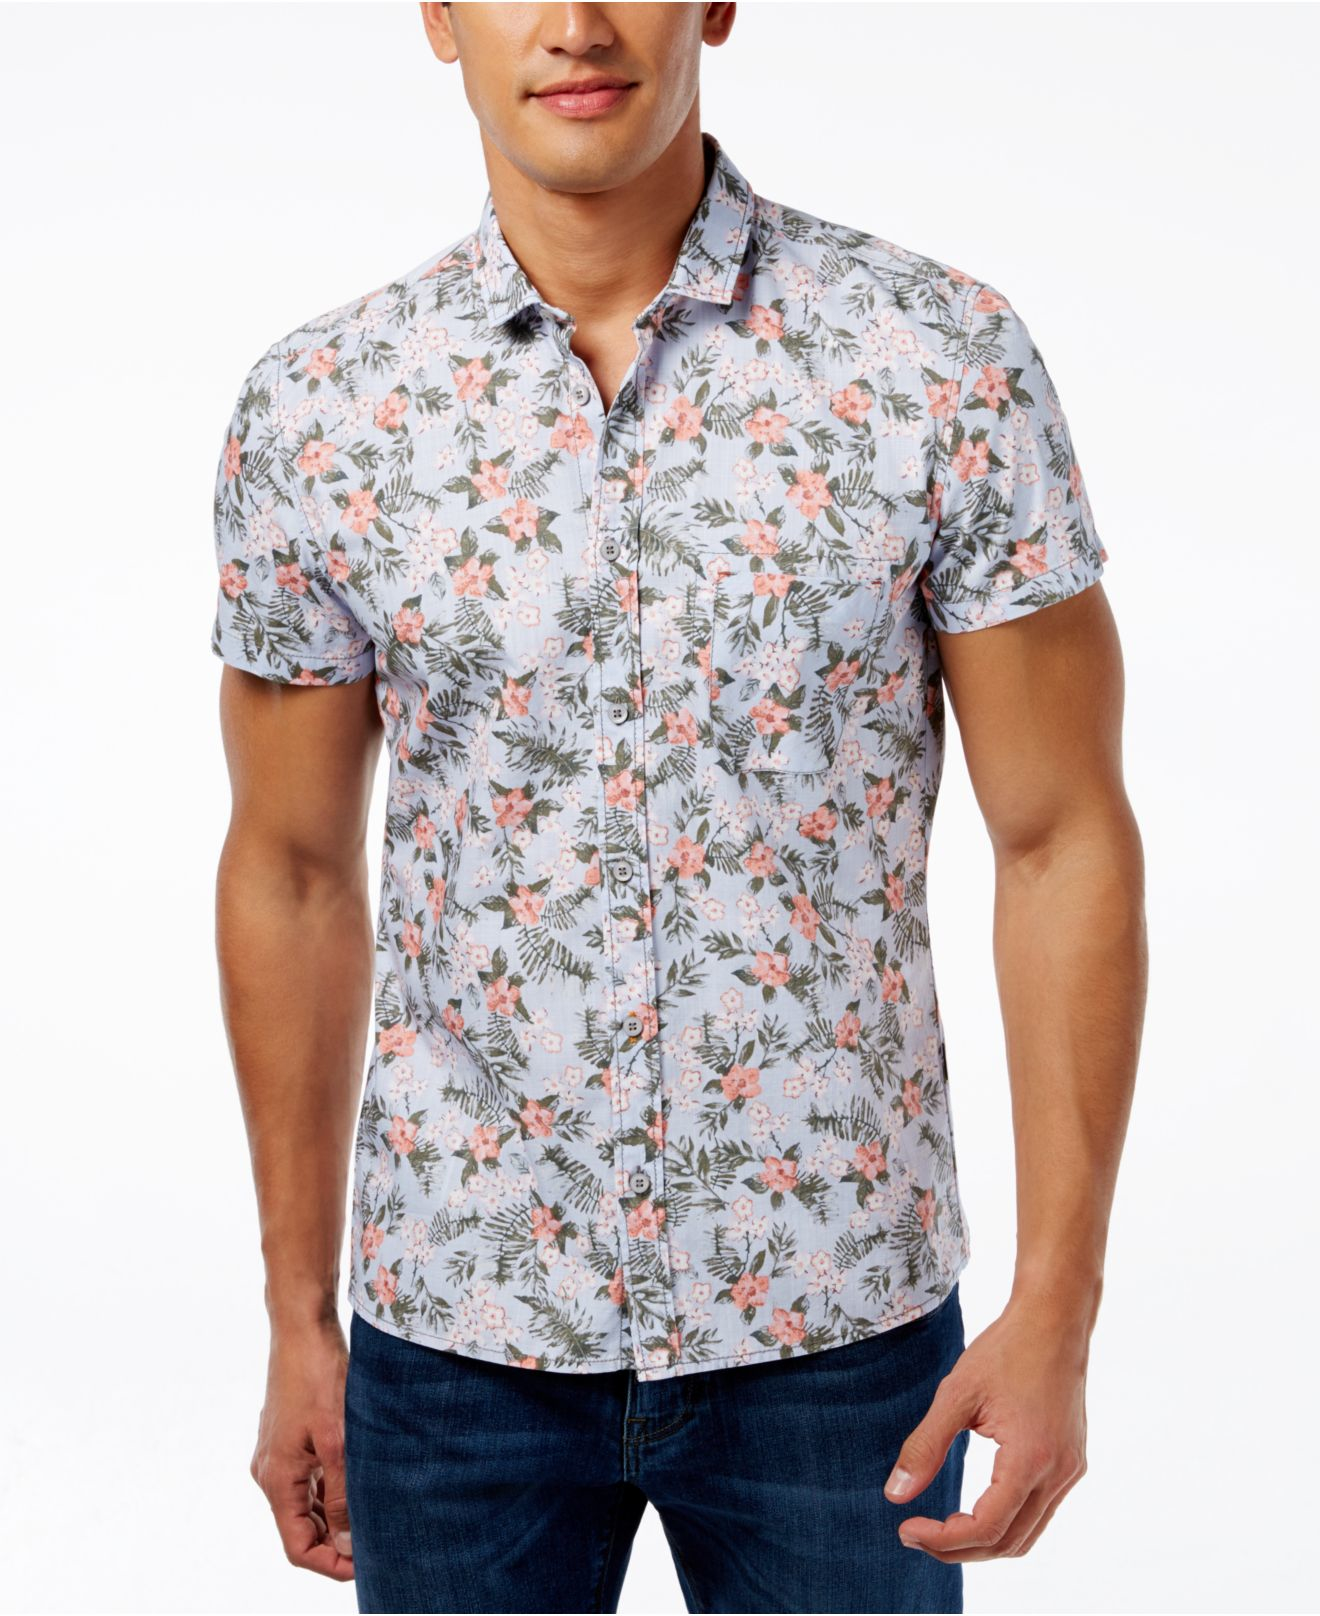 BOSS Ezippoe Classis Fit Floral Short Sleeve Shirt in Blue for Men - Lyst